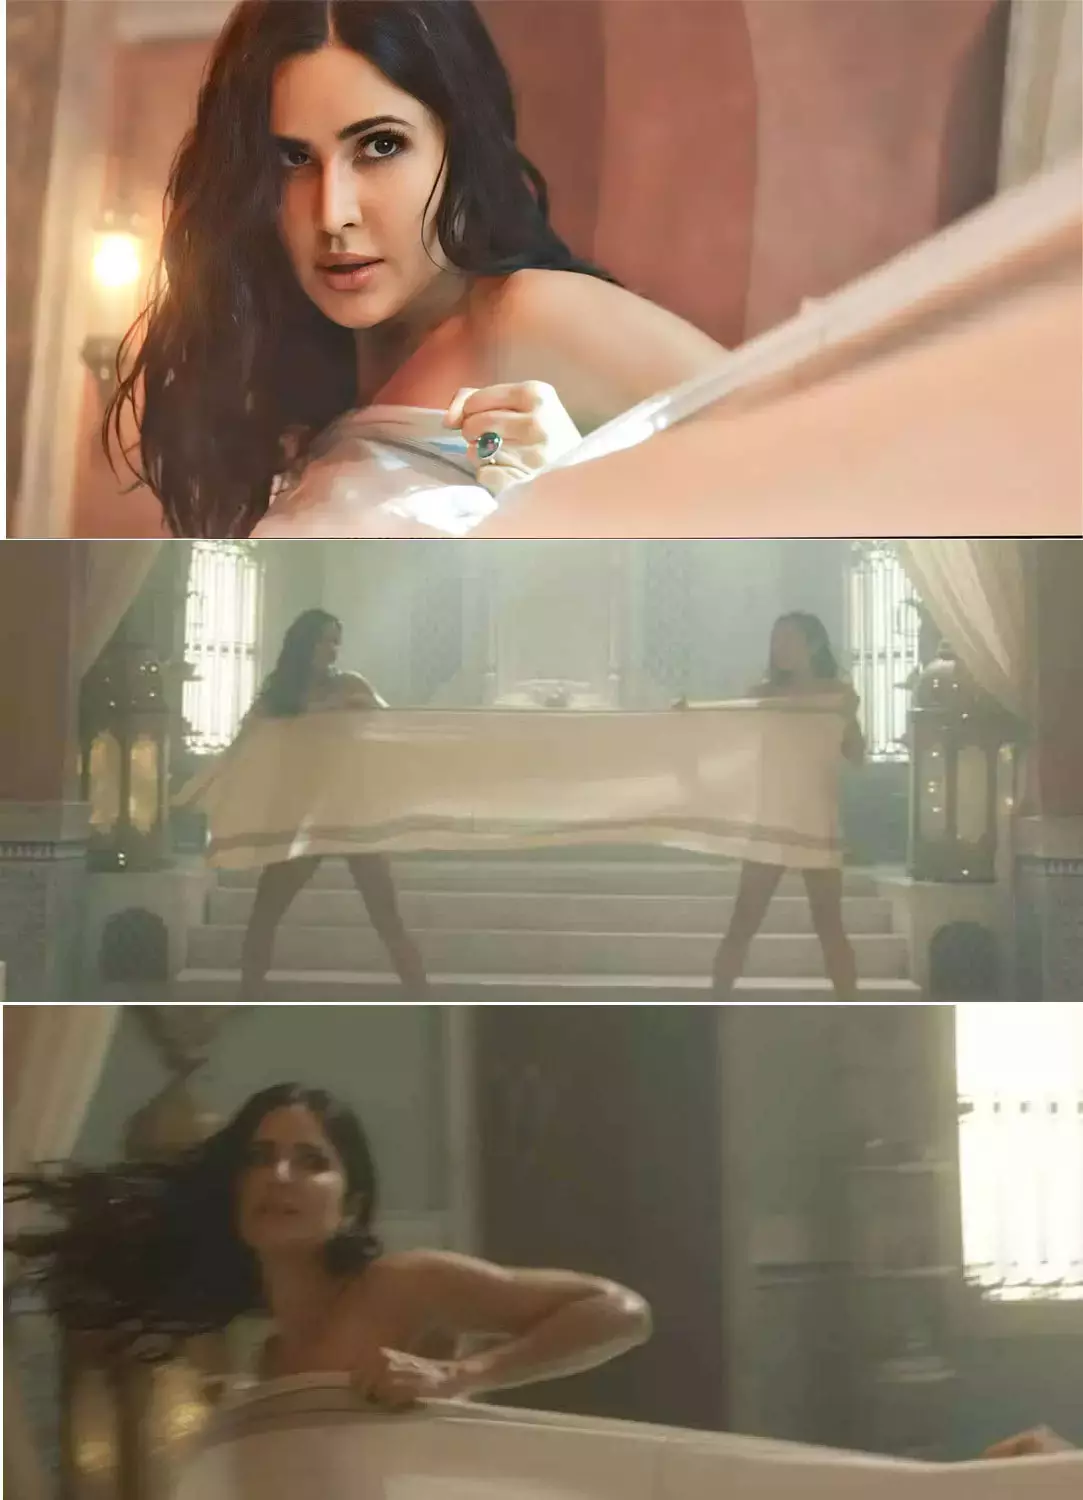 christine valera recommends katrina kaif nude pictures pic